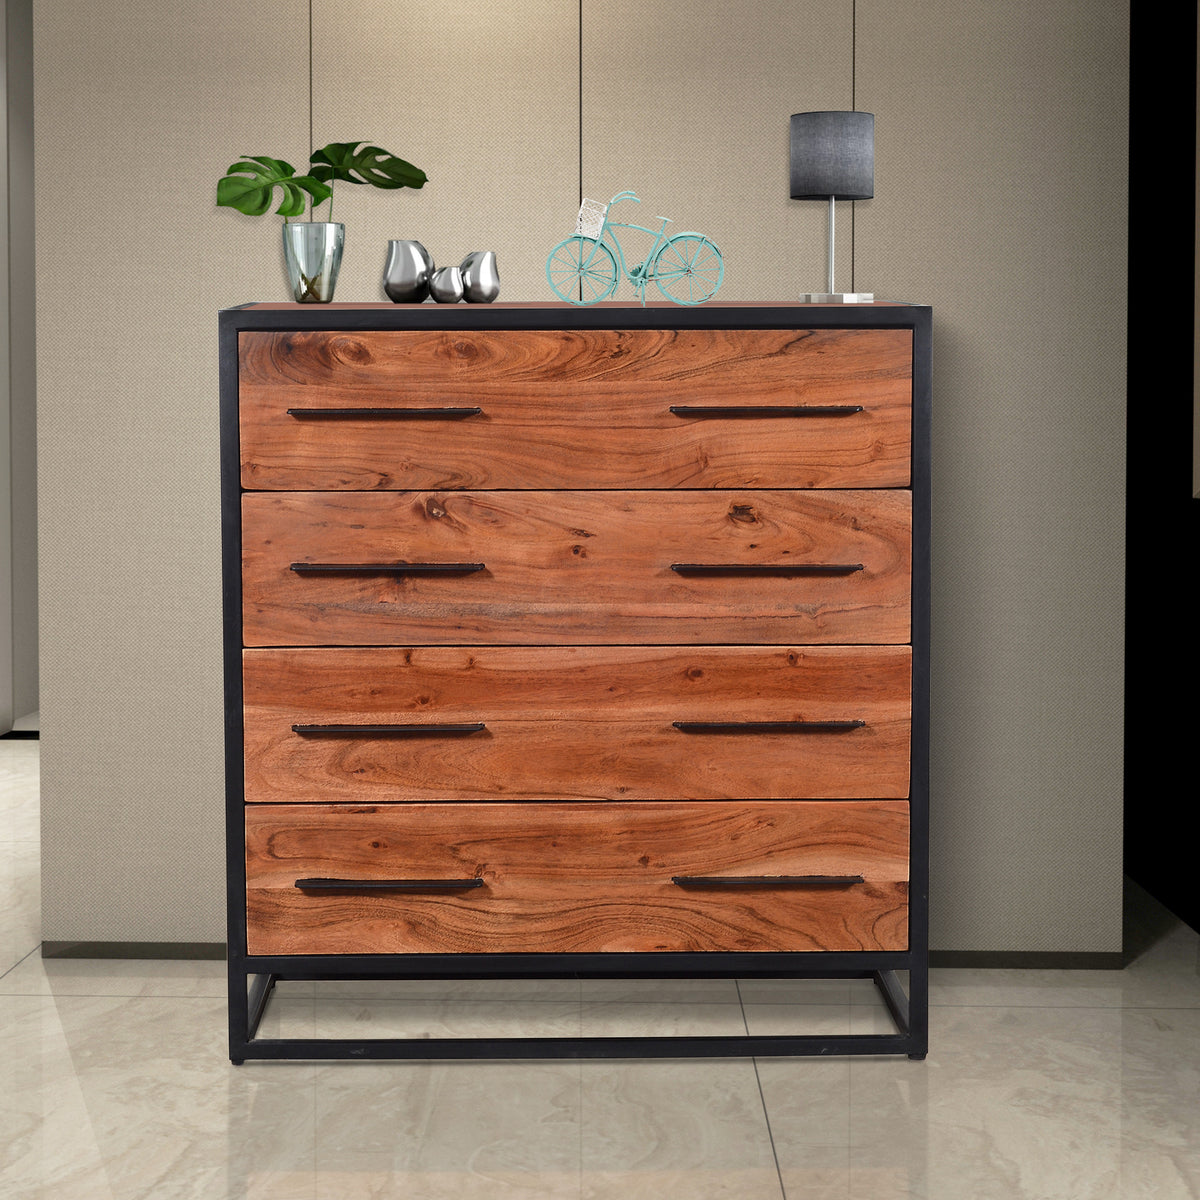 Handmade Dresser with Live Edge Design 4 Drawers, Brown and Black - UPT-197872